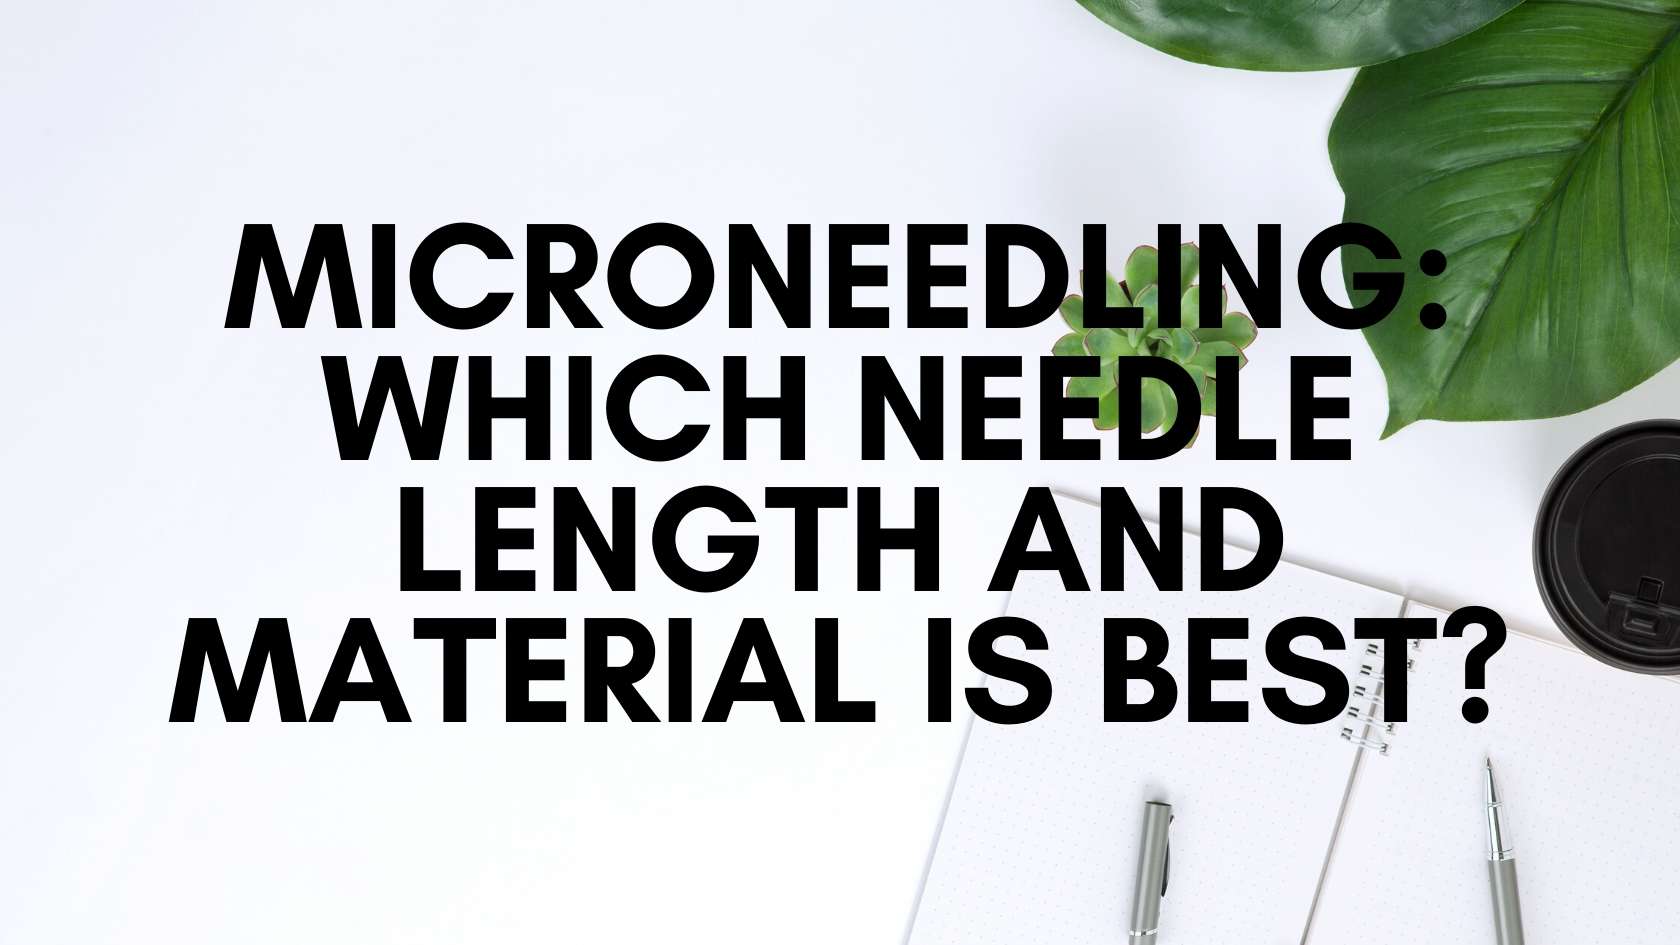 Microneedling: Which Needle Length and Material Is Best?